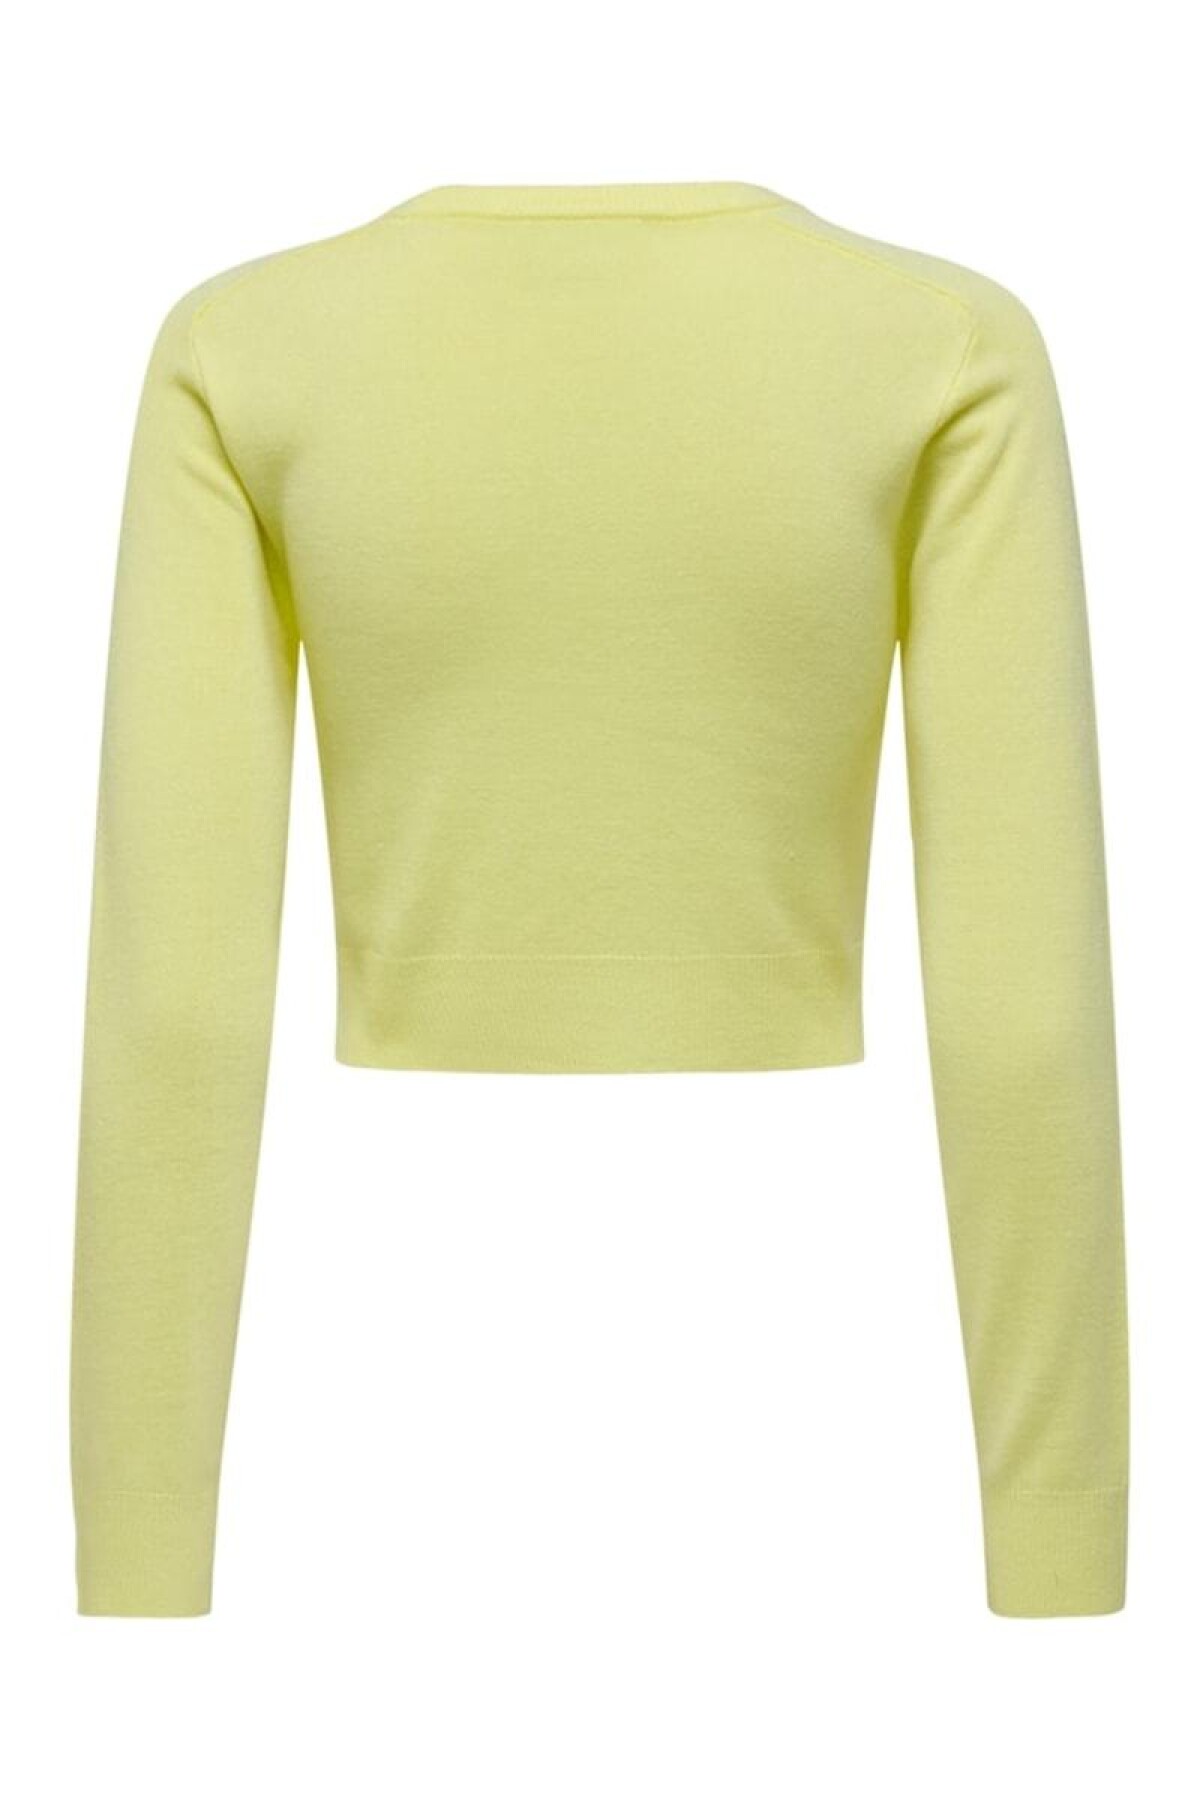 Sweater Sunny Cropped Sunny Lime